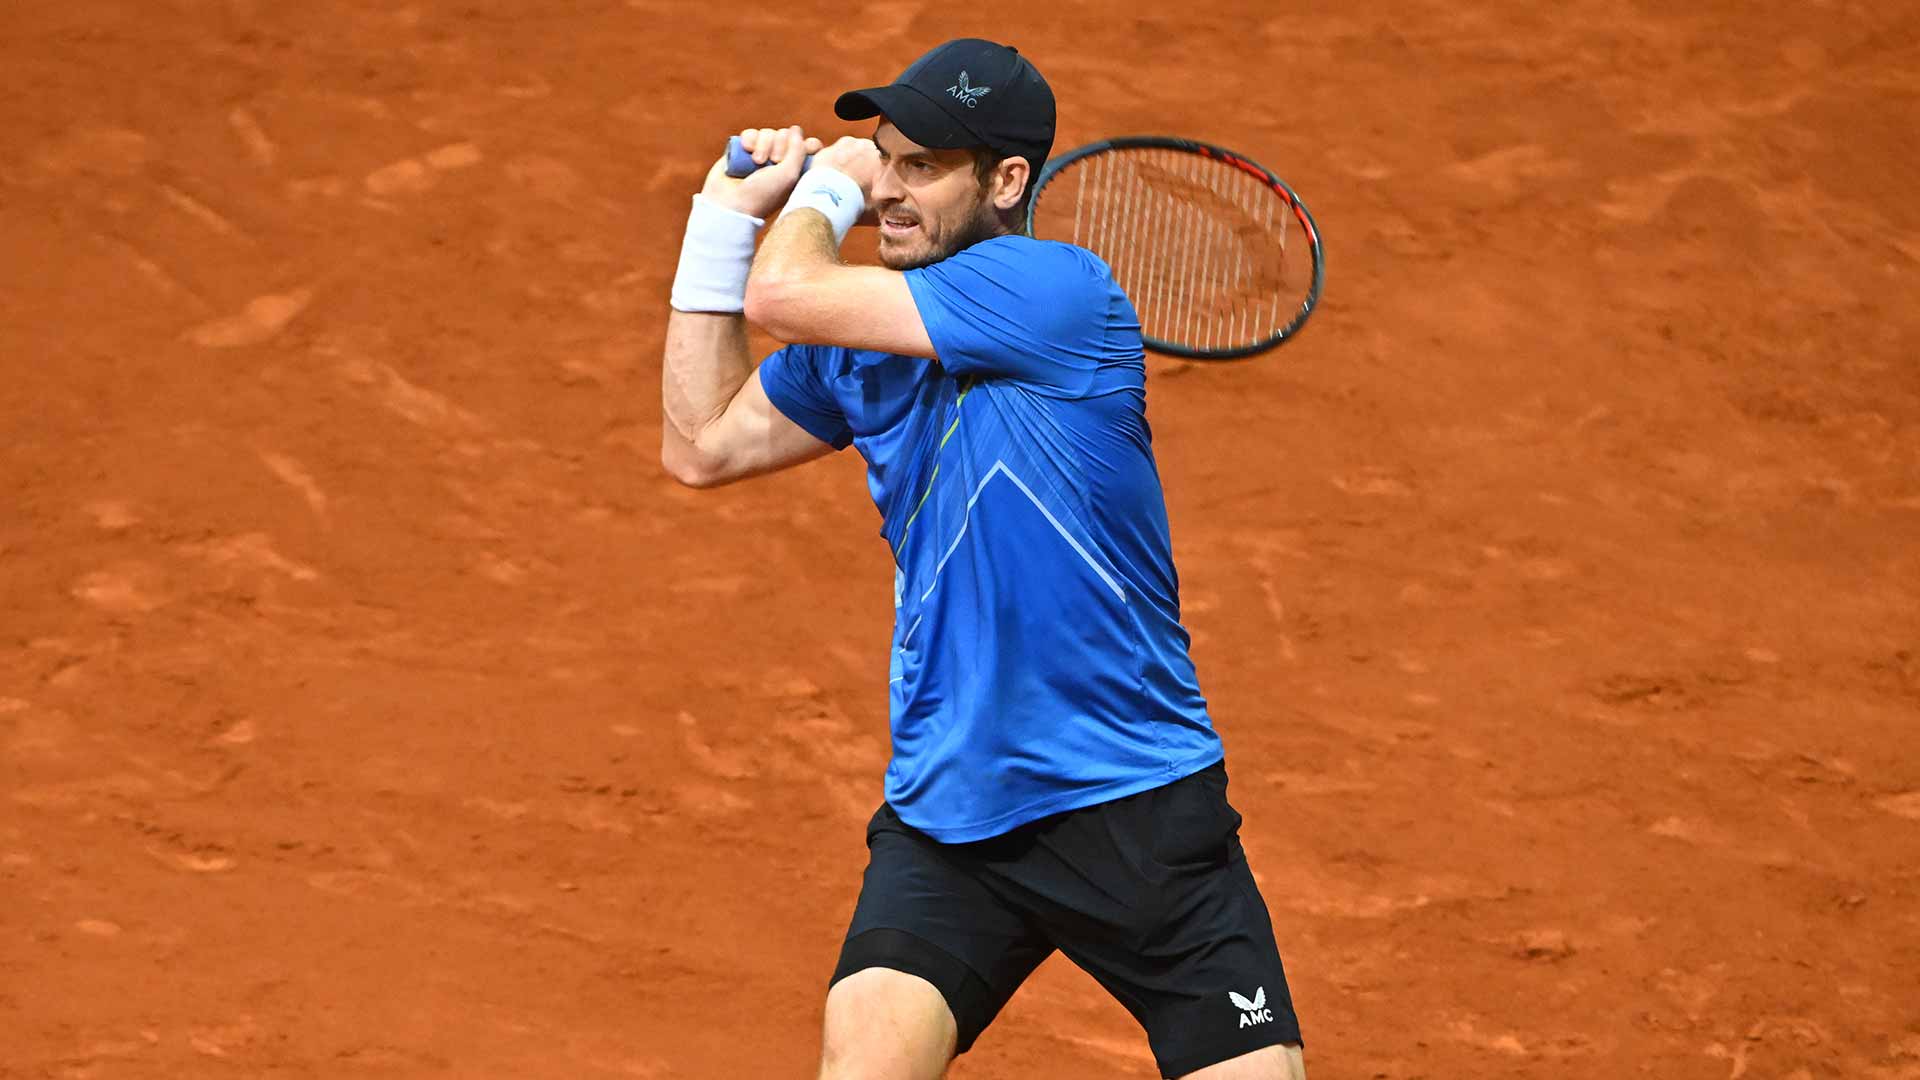 Andy Murray faces Alex de Minaur in the first round in Monte-Carlo.